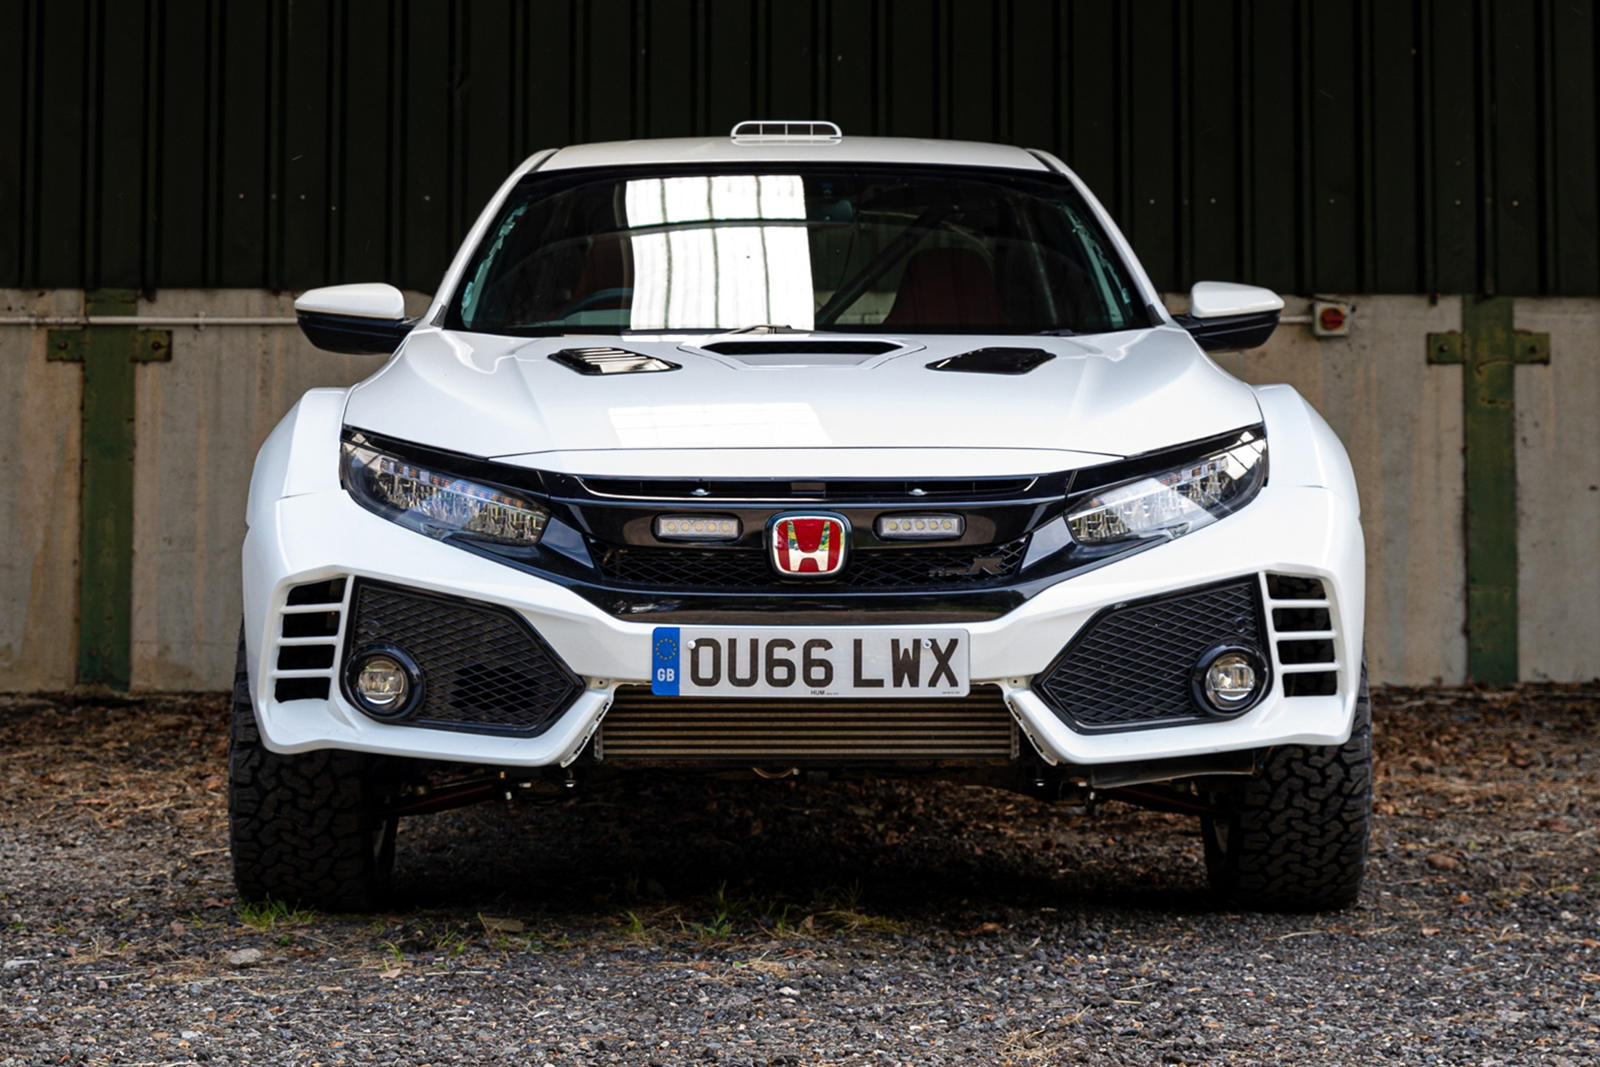 This Lifted Honda Civic Type R Is Built For Life Off-Road | CarBuzz